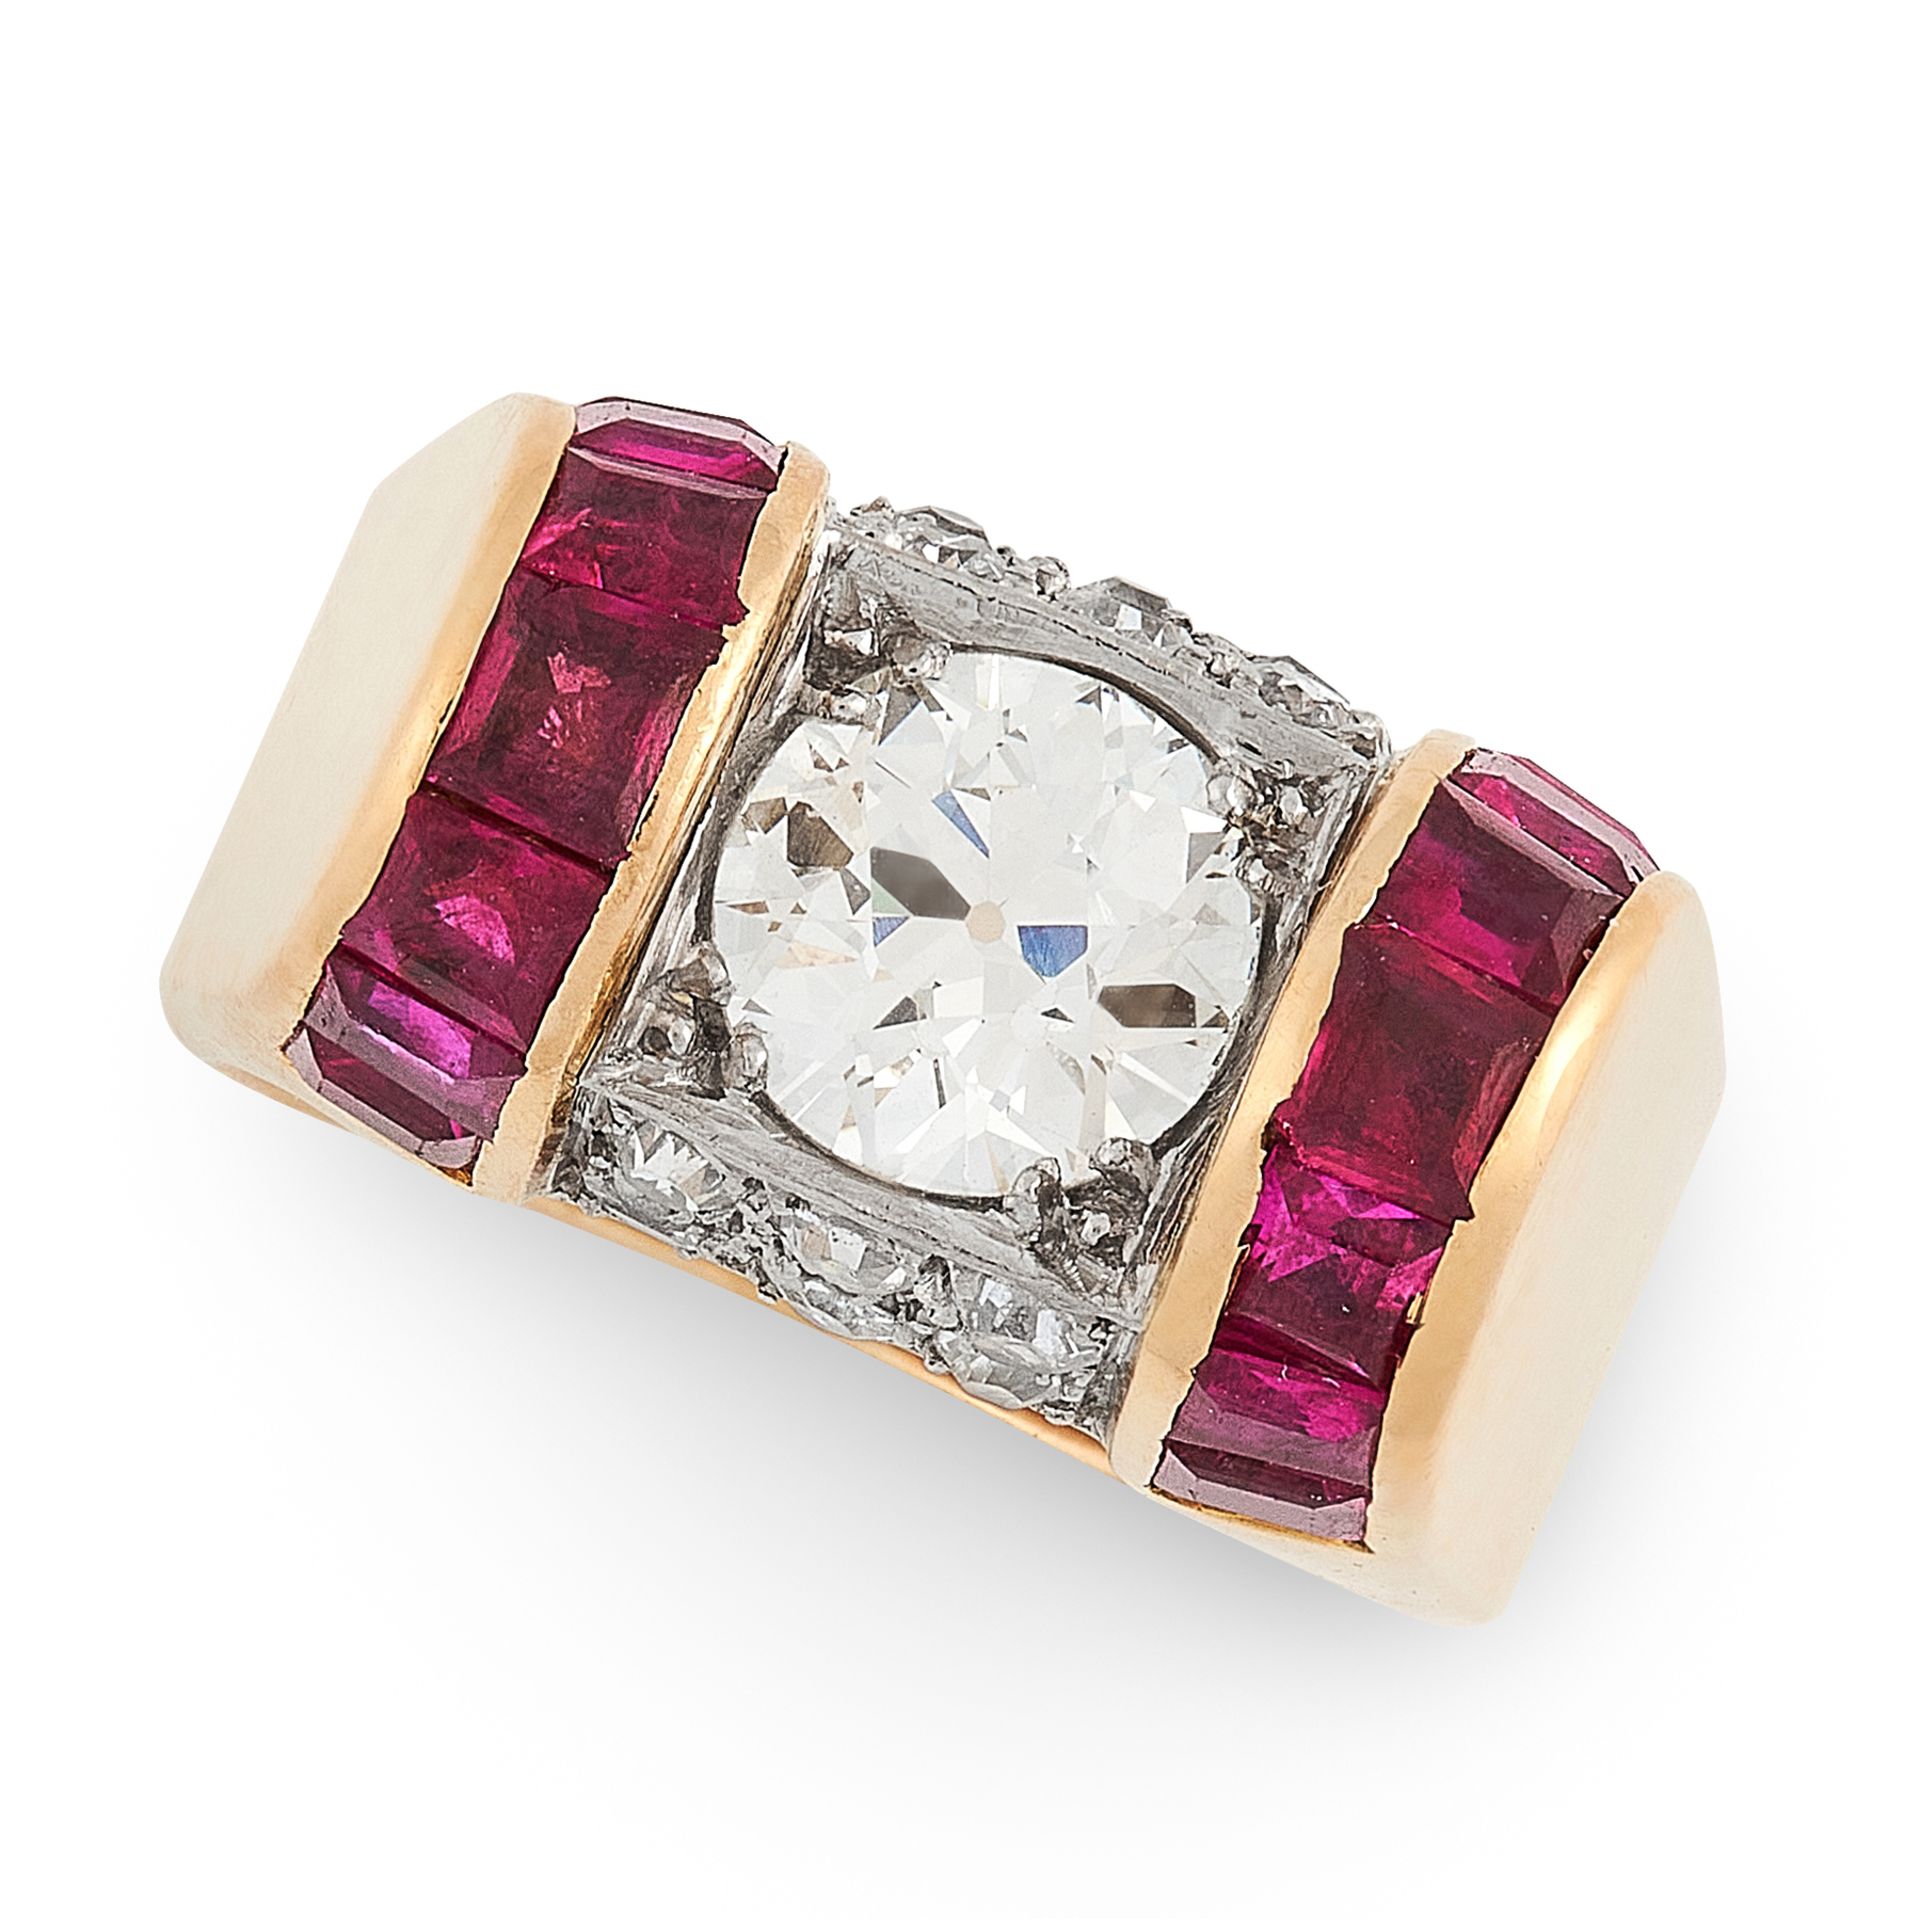 A RETRO DIAMOND AND RUBY RING CIRCA 1945 in 18ct yellow gold, set with an old cut diamond of 1.38